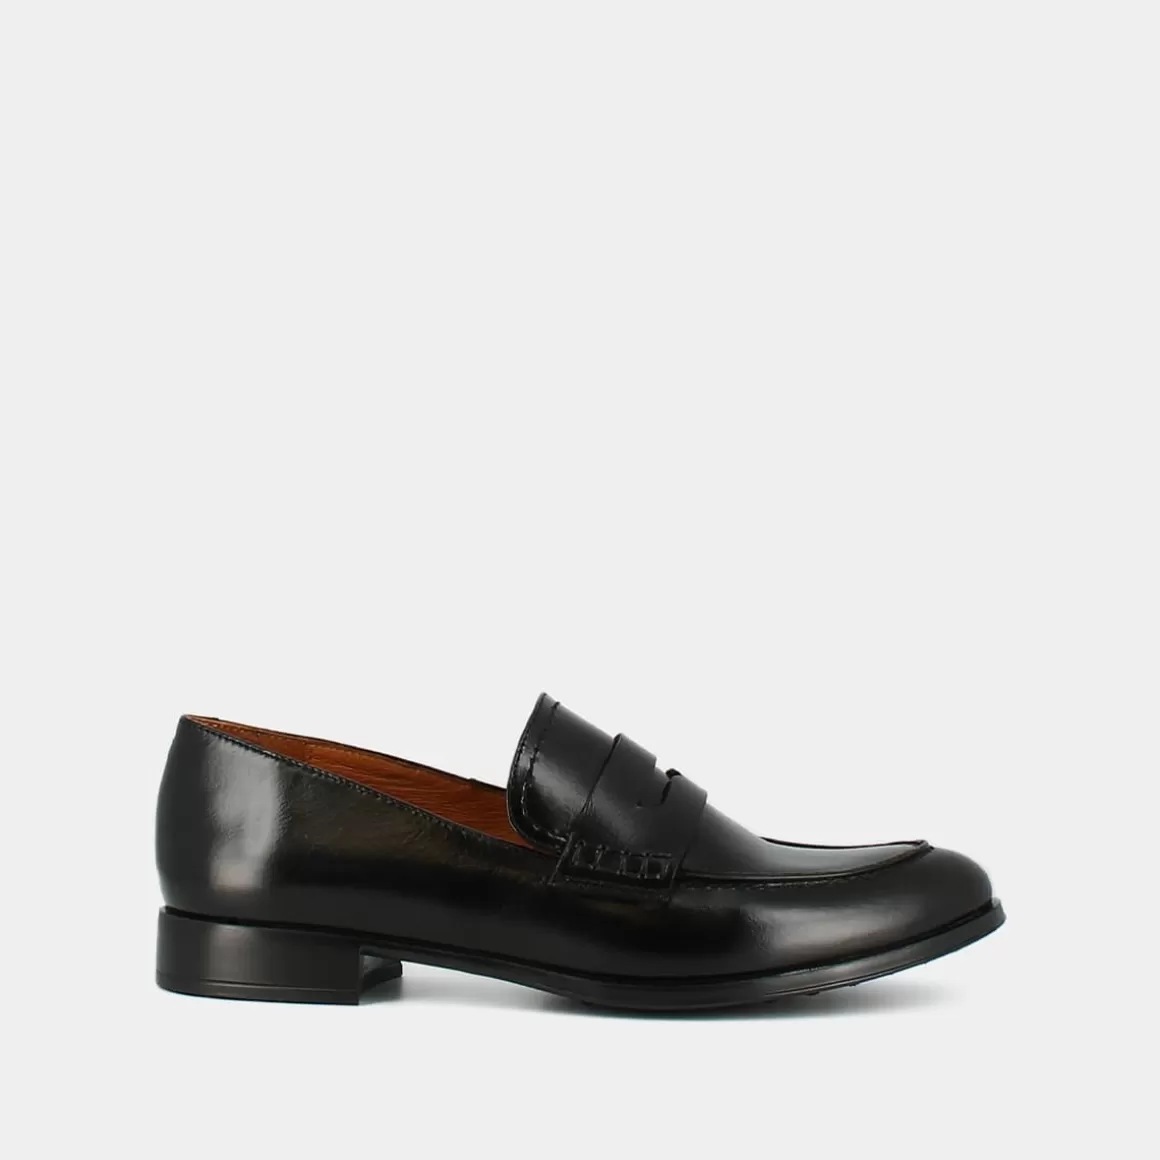 Loafers with rounded toe and small heel<Jonak Clearance